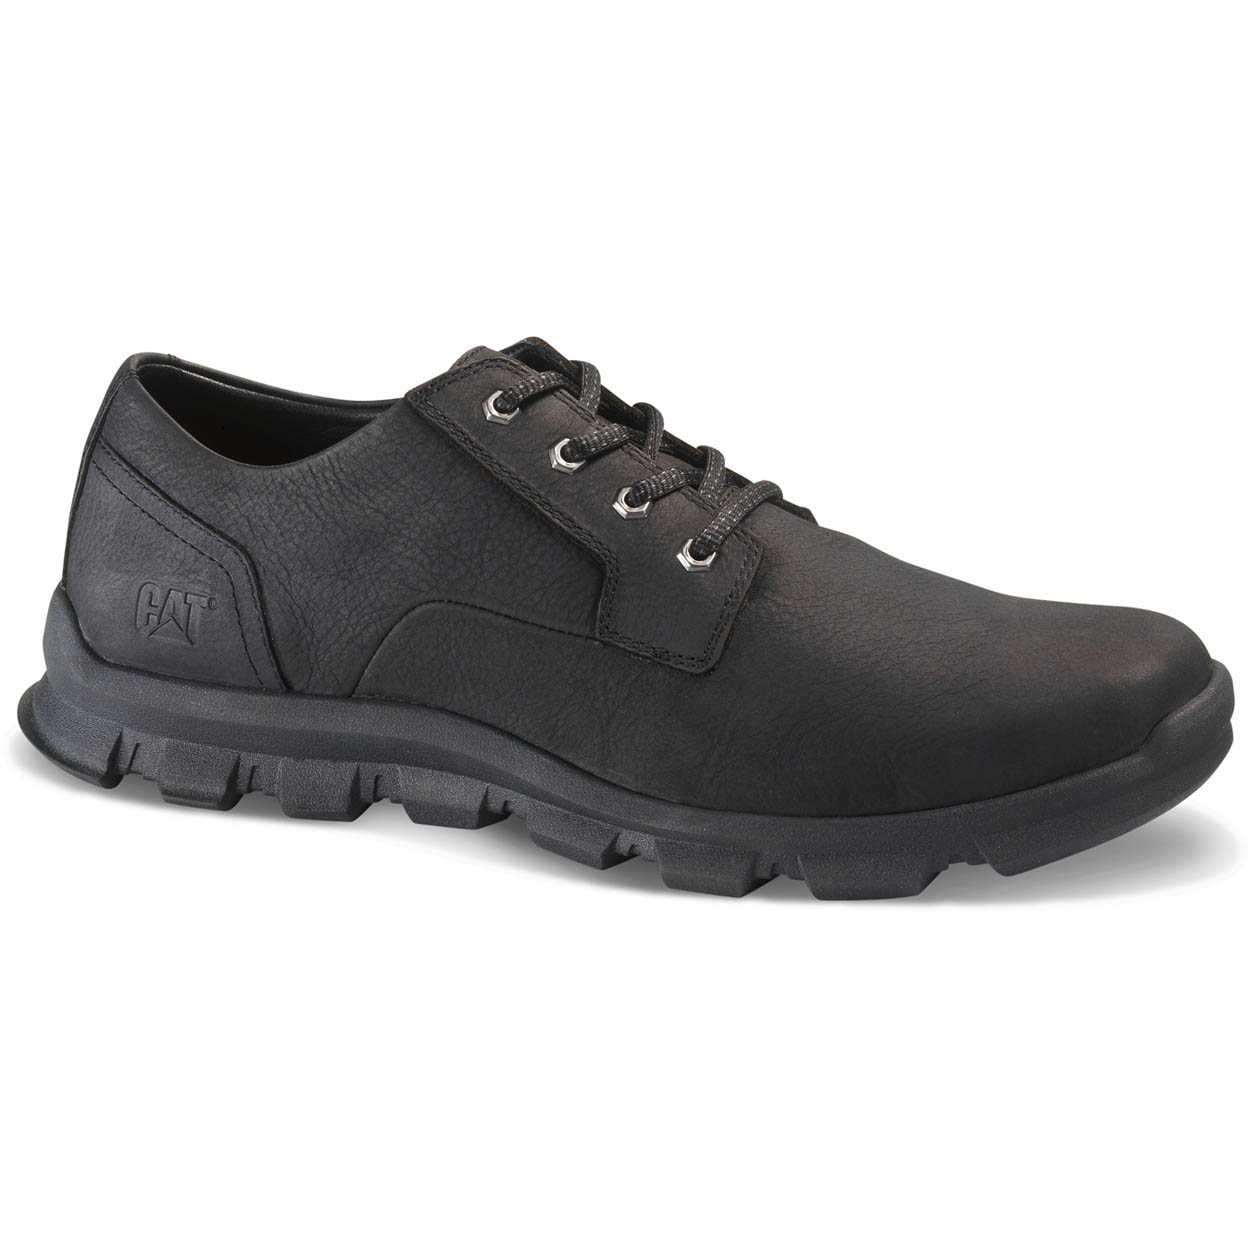 Caterpillar Intent Philippines - Mens Casual Shoes - Black 84903AHLW